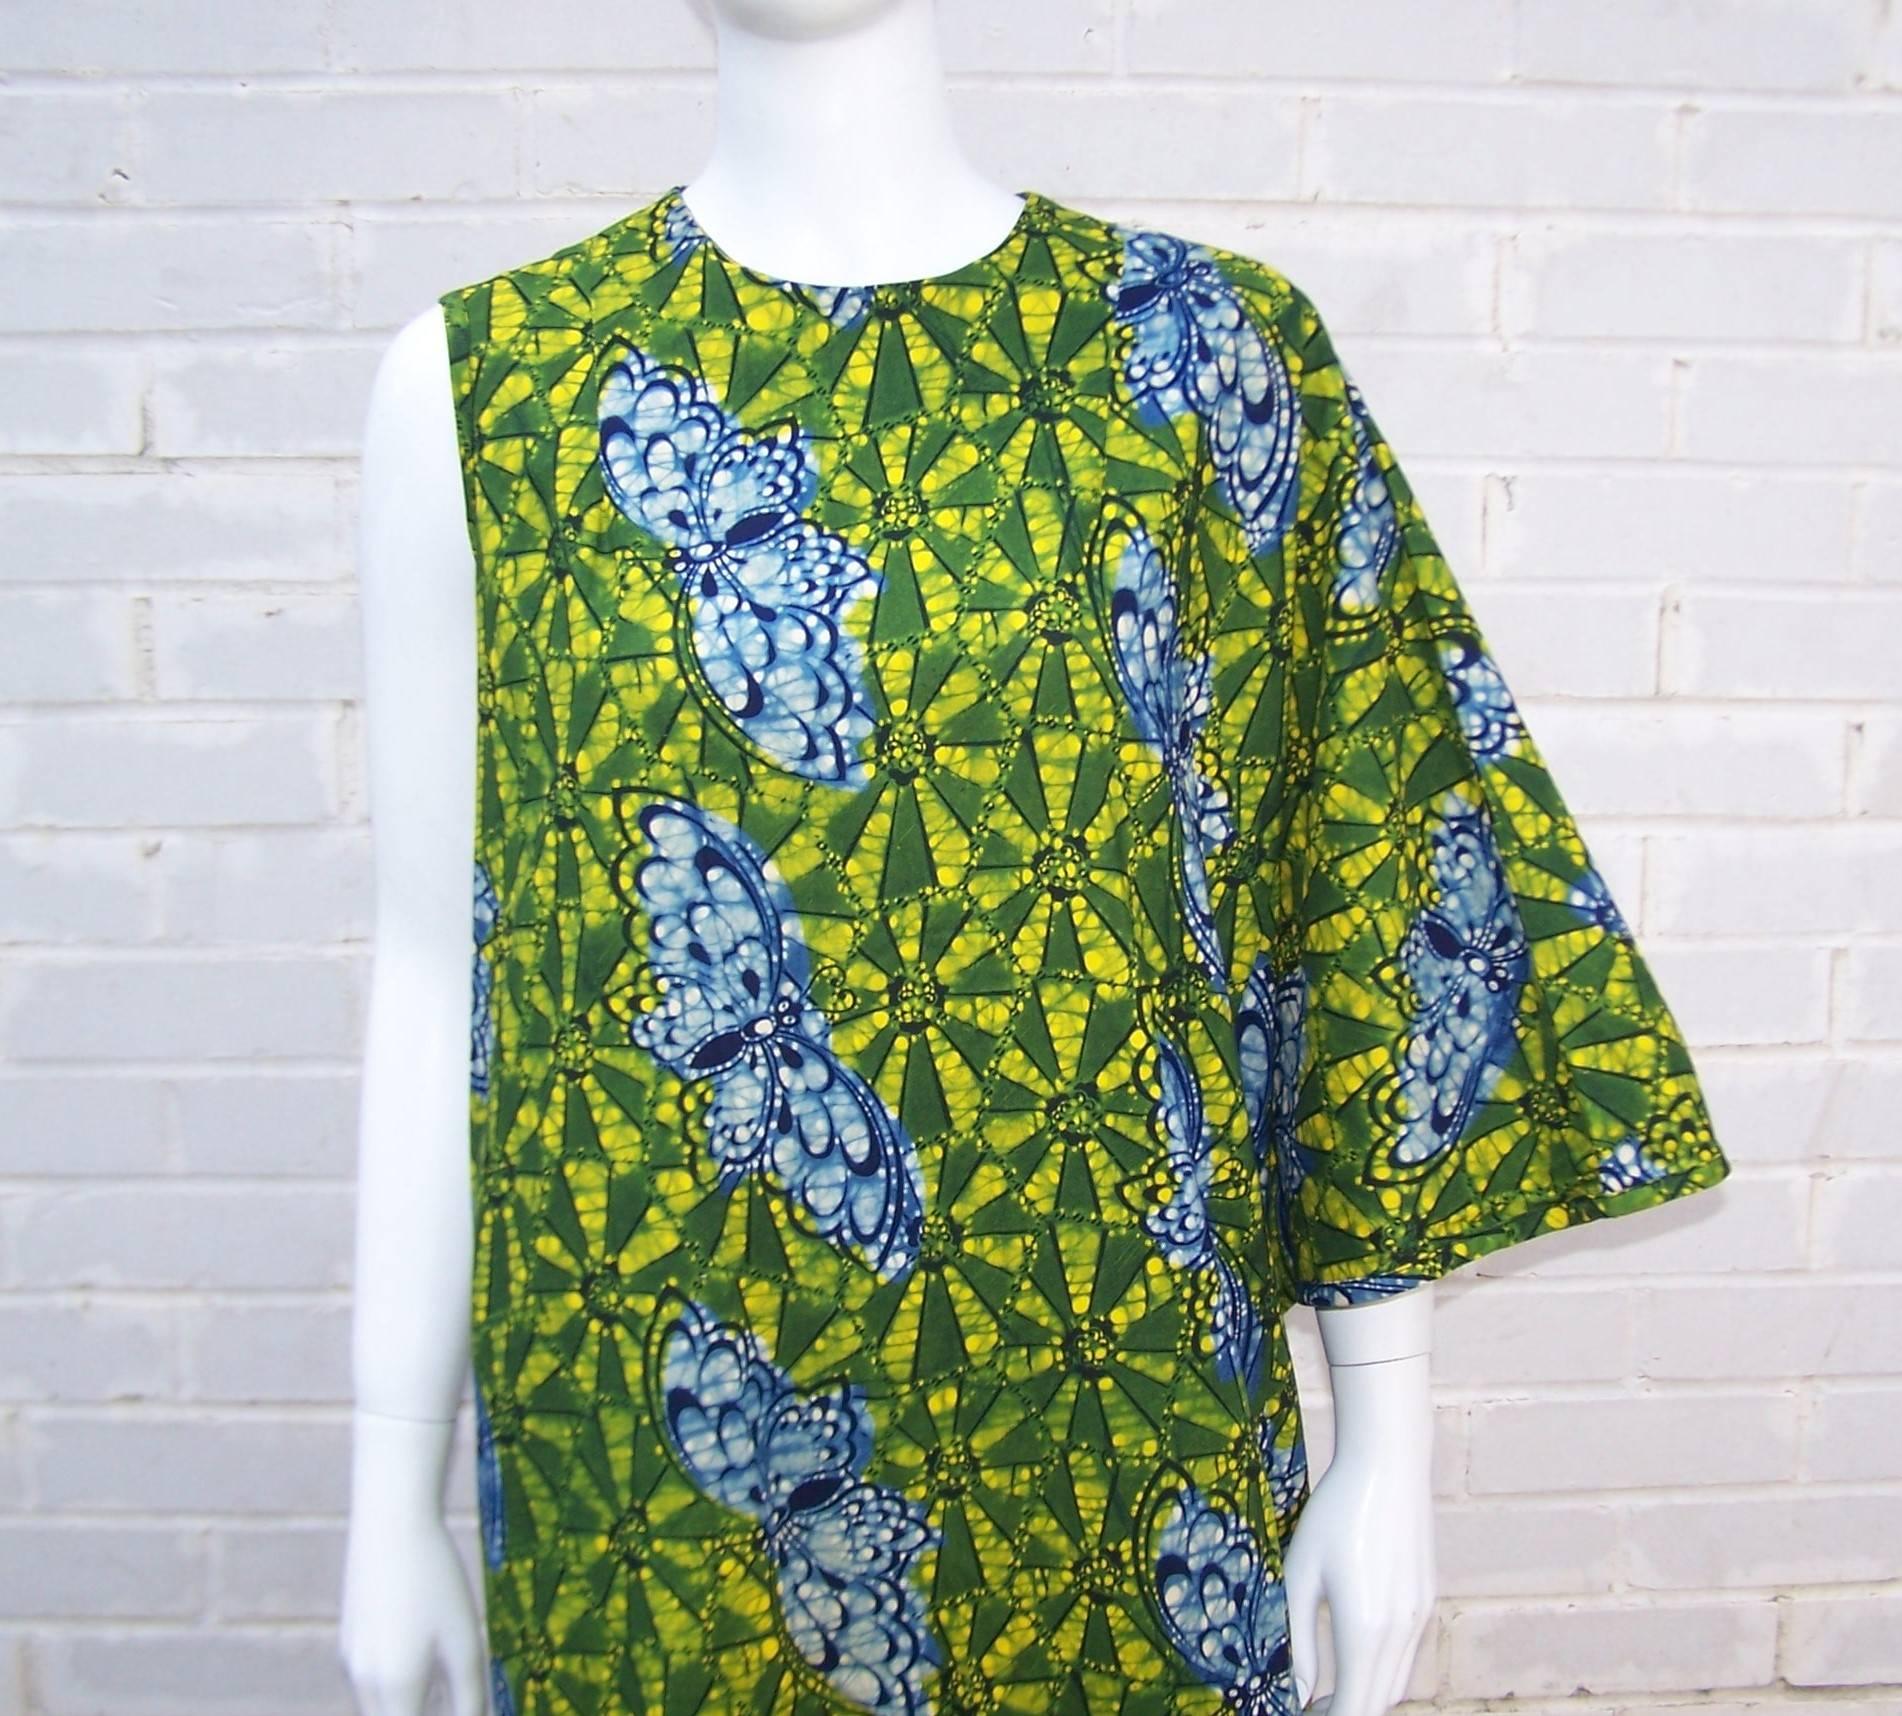 This asymmetrical caftan is a great combination of glamour and 1960's psychedelia all wrapped up in a colorful batik printed cotton fabric.  The lush greens, yellows and blue colors are reminiscent of a tropical rain forest and the design also